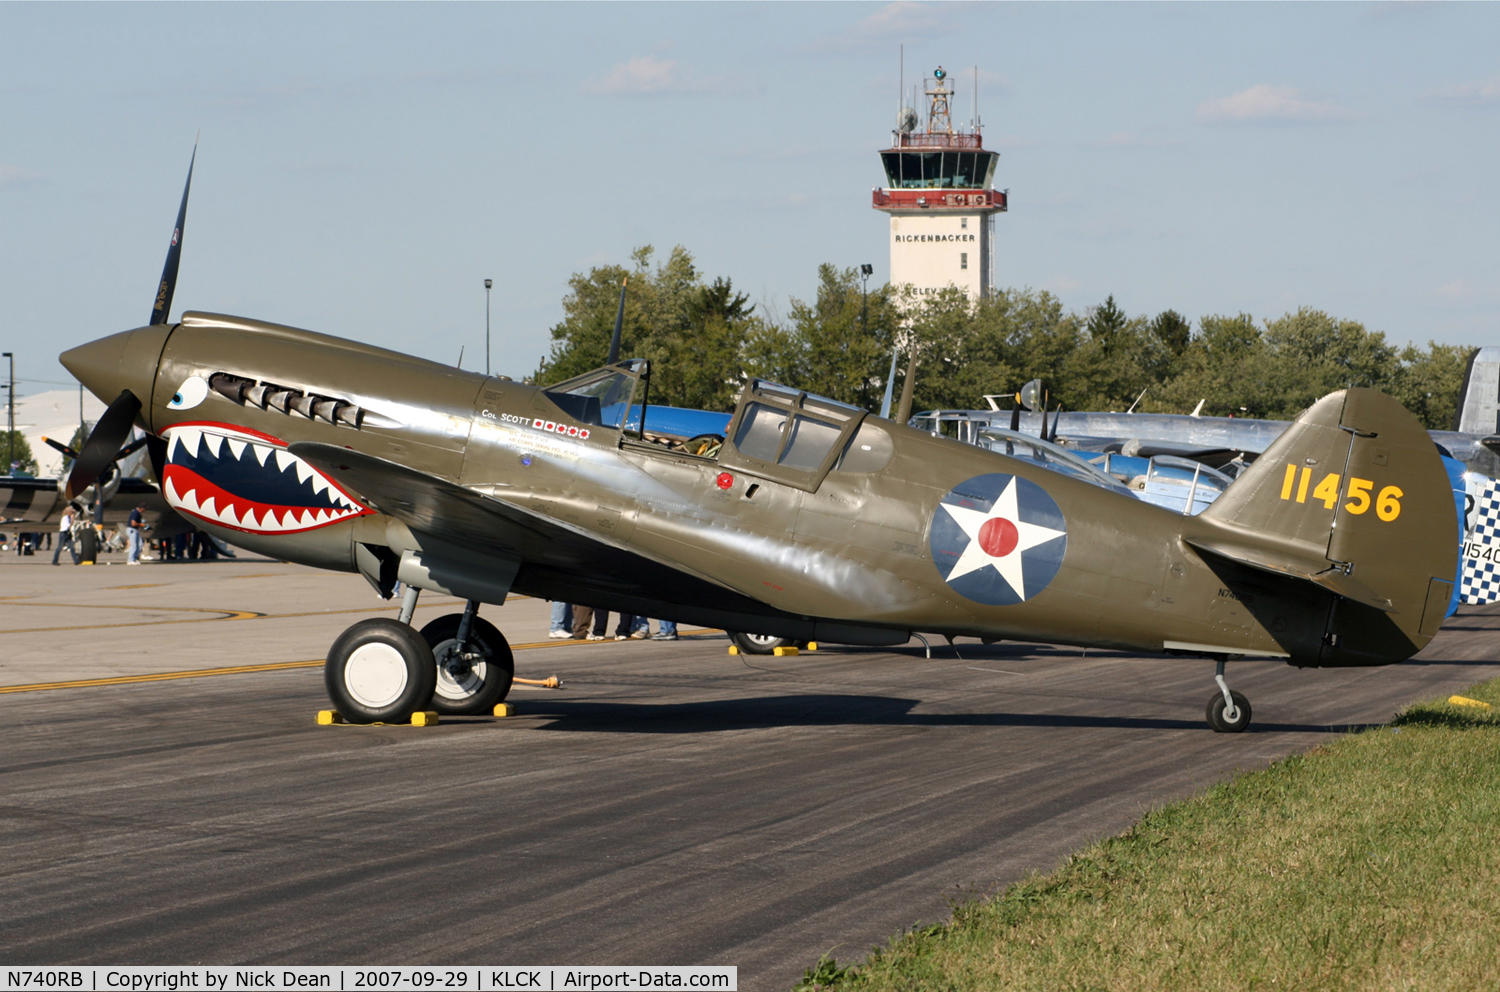 N740RB, 1944 Curtiss P-40N Warhawk C/N 33108, C/N 15370 the military serial is once again mistakenly inserted in the wrong place